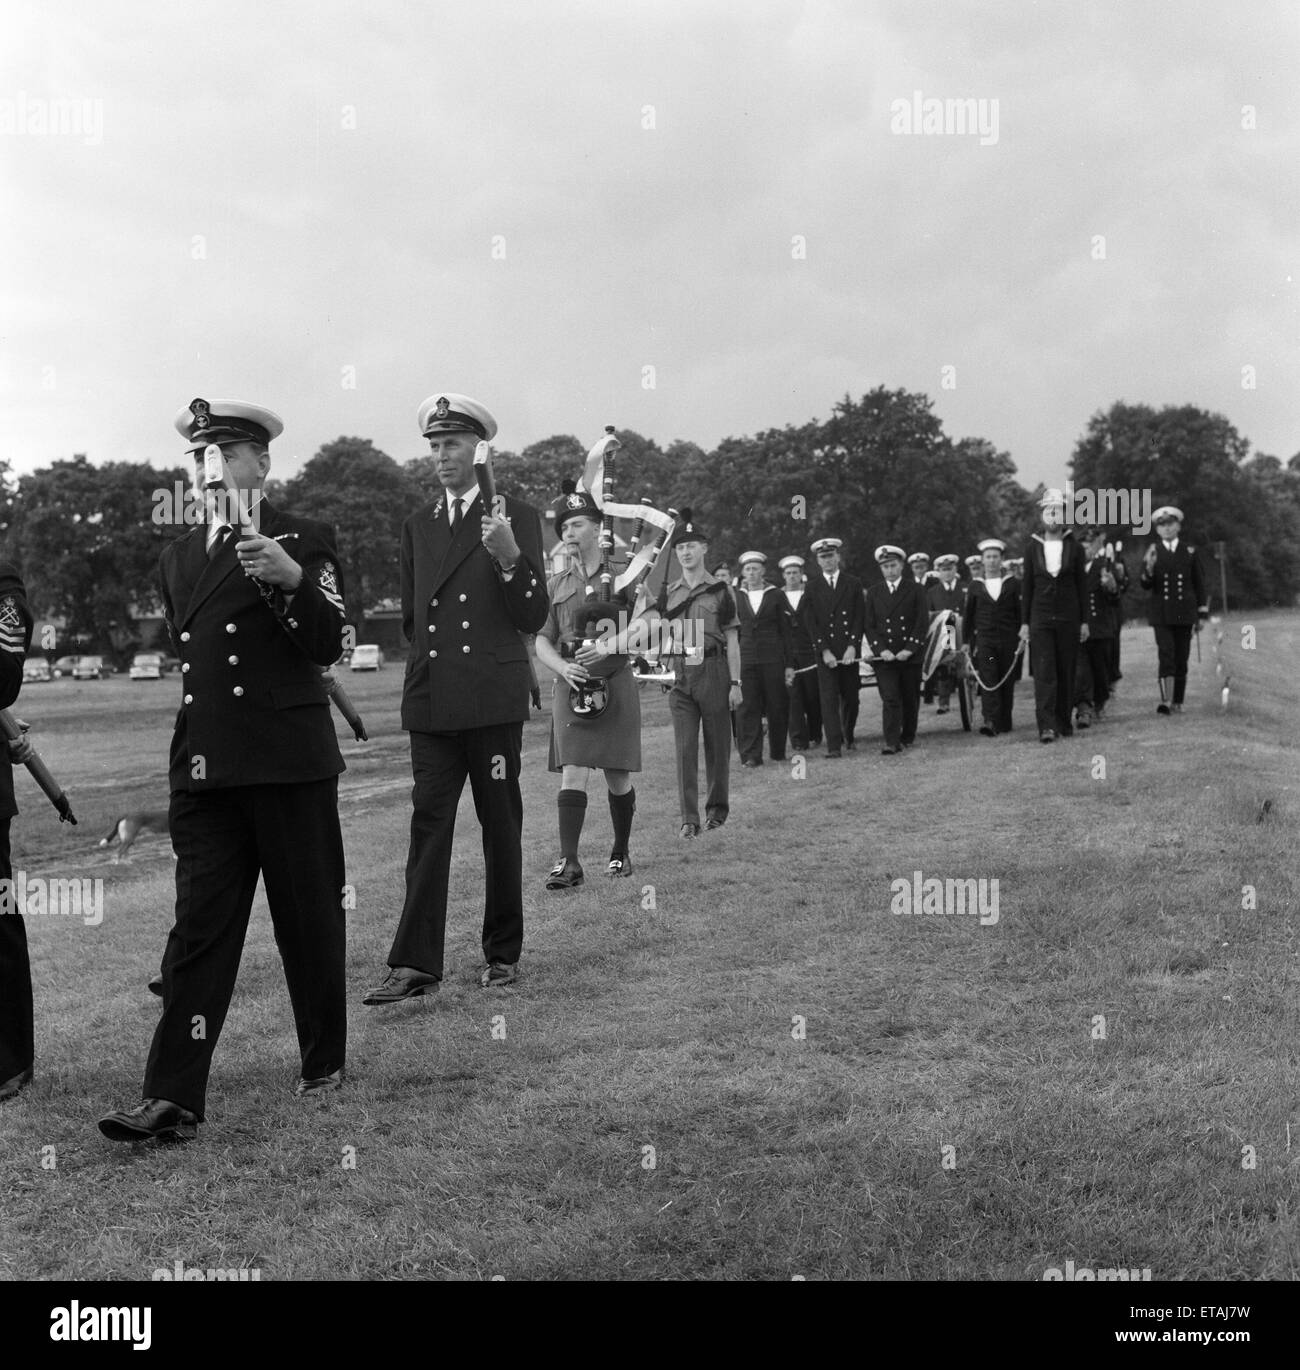 Lee-Enfield Rifle No. 4, buried with full military honours at Bisley, Surrey, England, by a 26 strong party of Royal Navy Officers and Men, Thursday 7th July 1966. Pictured, The burial party is piped to the graveside at Bisley. Stock Photo